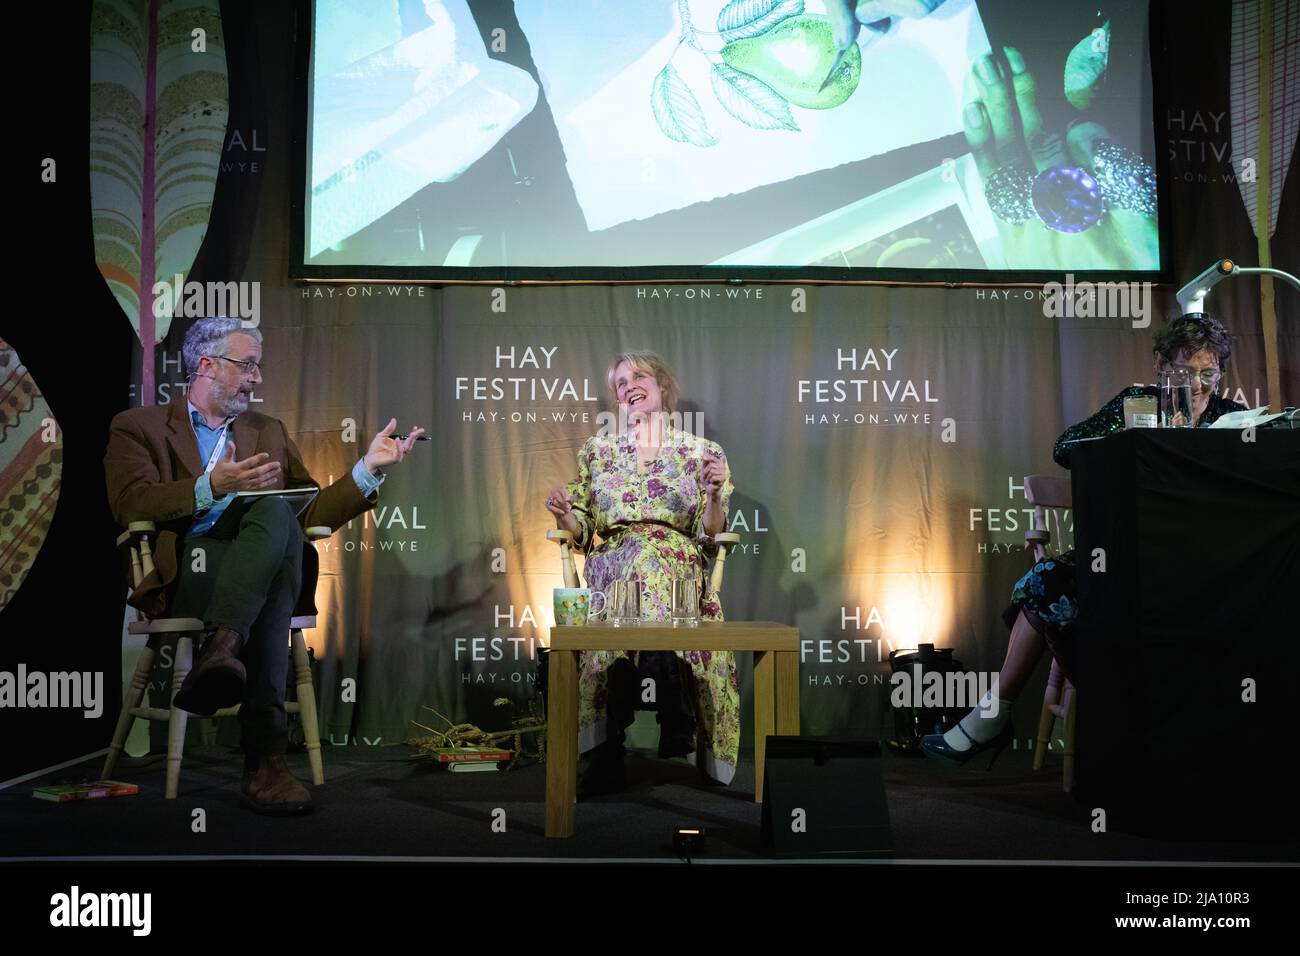 Hay-on-Wye, Wales, UK. 26th May, 2022. Adele Nozedar and Lizzie Harper talk to Andy Fryers at Hay Festival 2022, Wales. Credit: Sam Hardwick/Alamy. Stock Photo